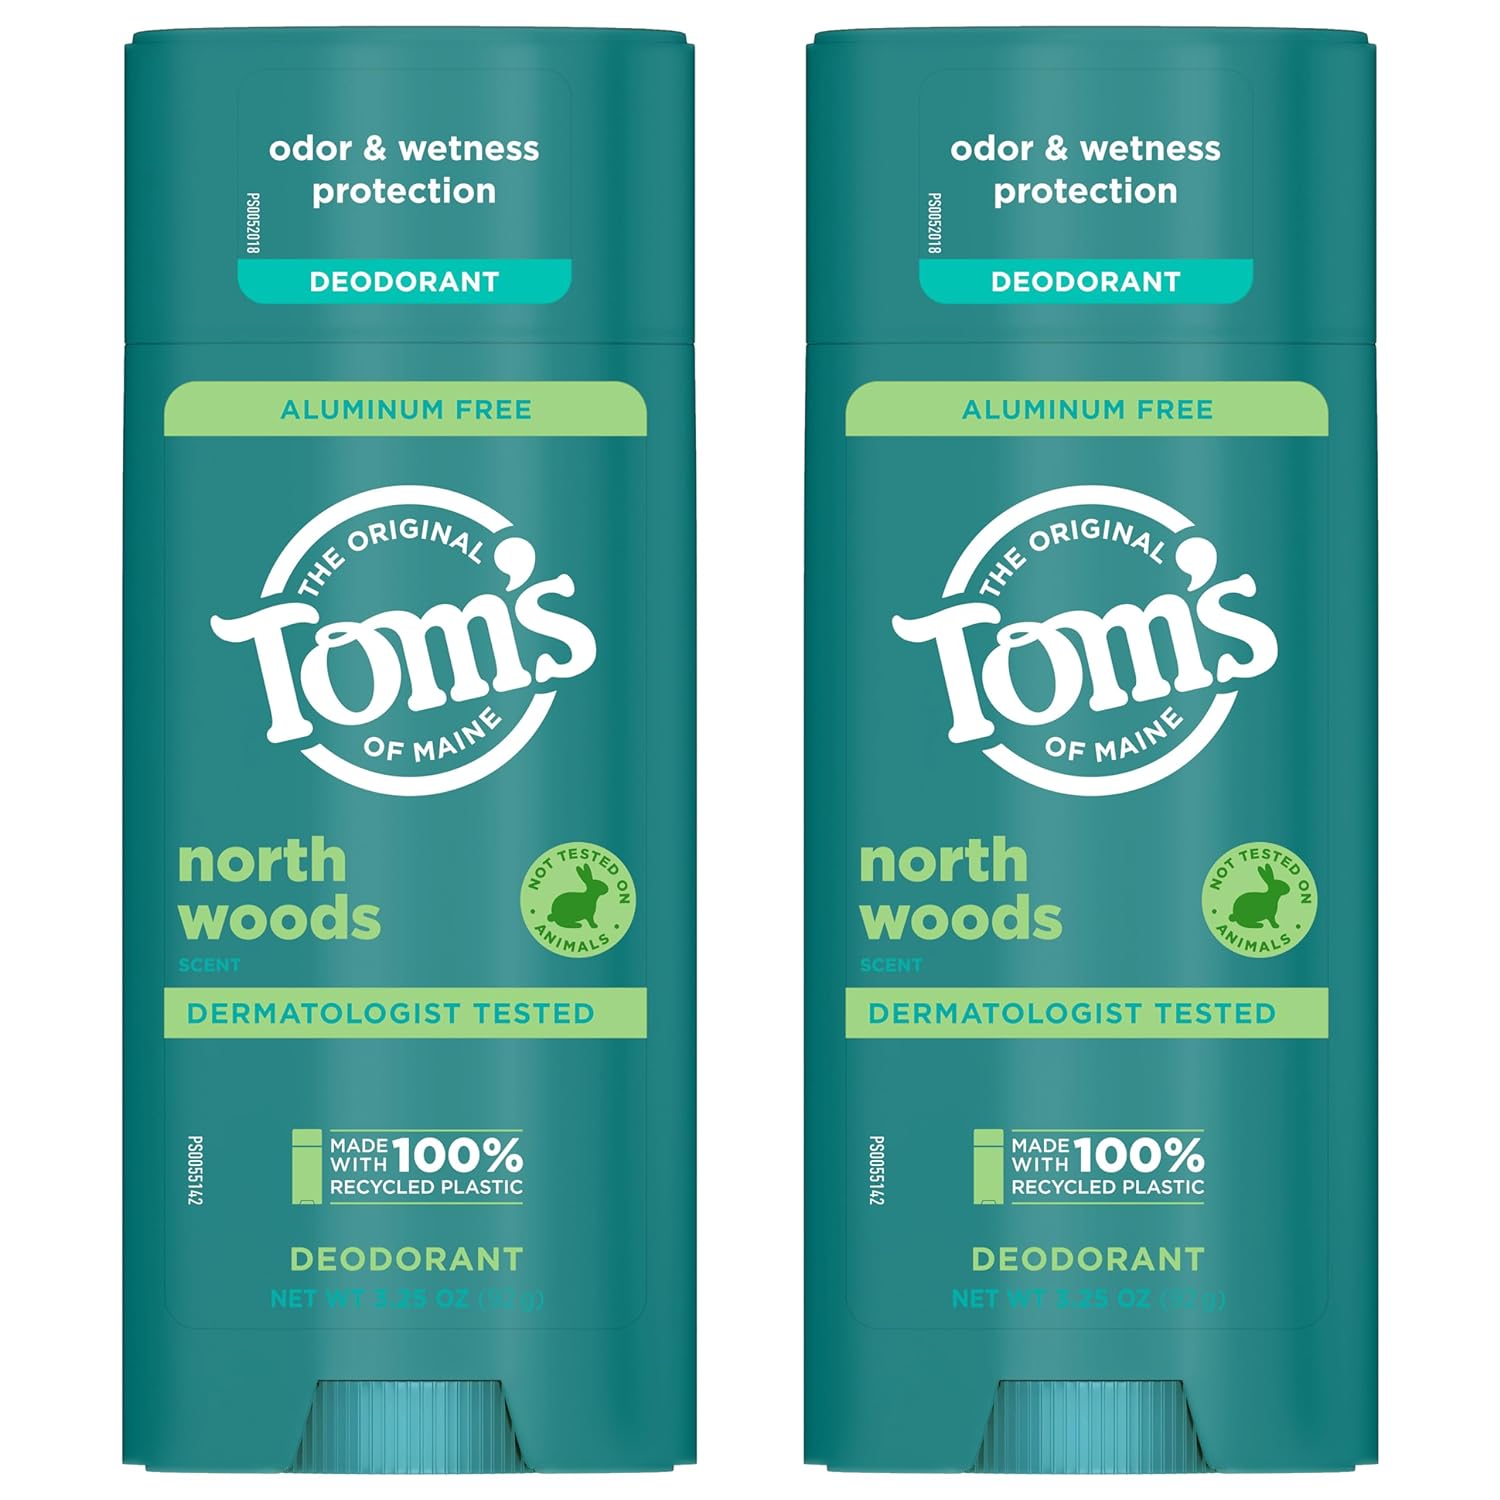 Tom’s of Maine North Woods Natural Deodorant for Men and Women, Aluminum Free, 3.25 oz, 2-Pack